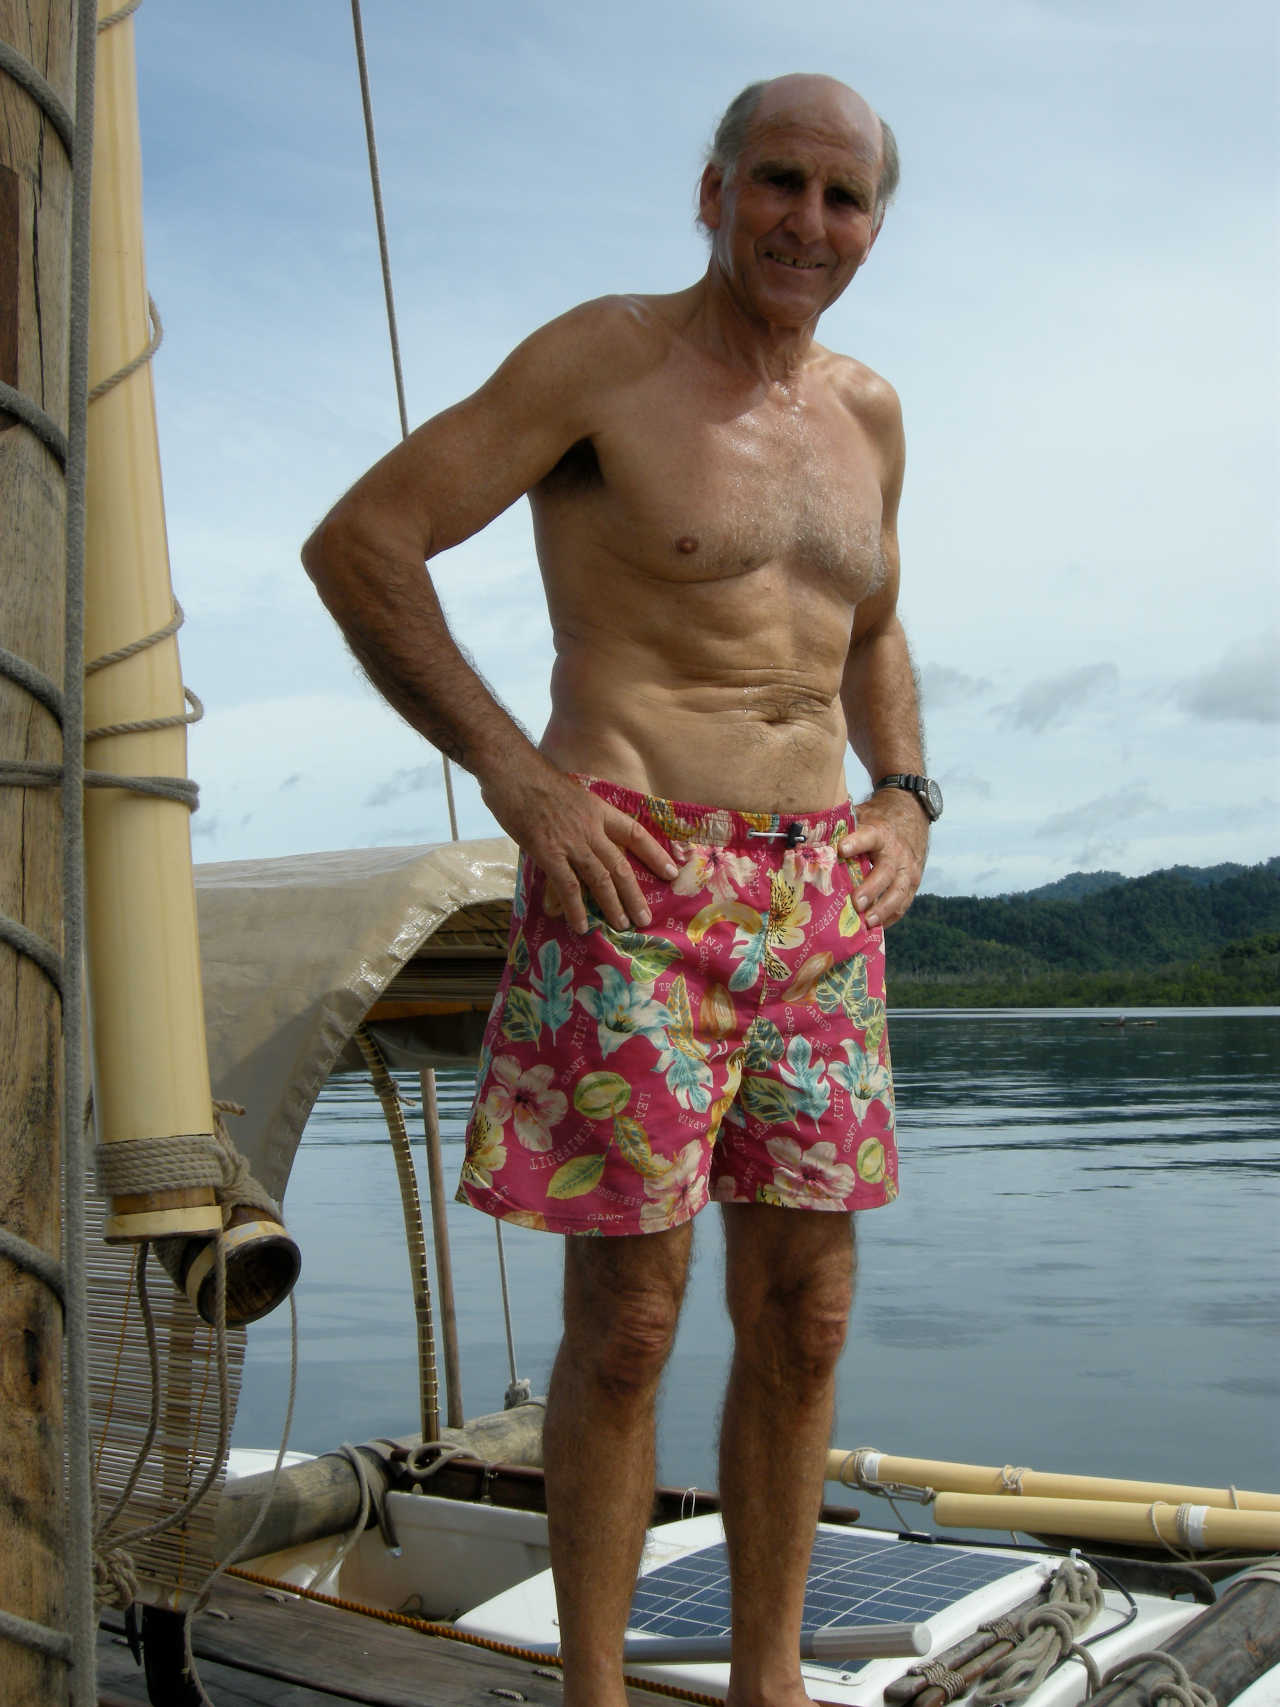 Christoph on deck in swimming shorts